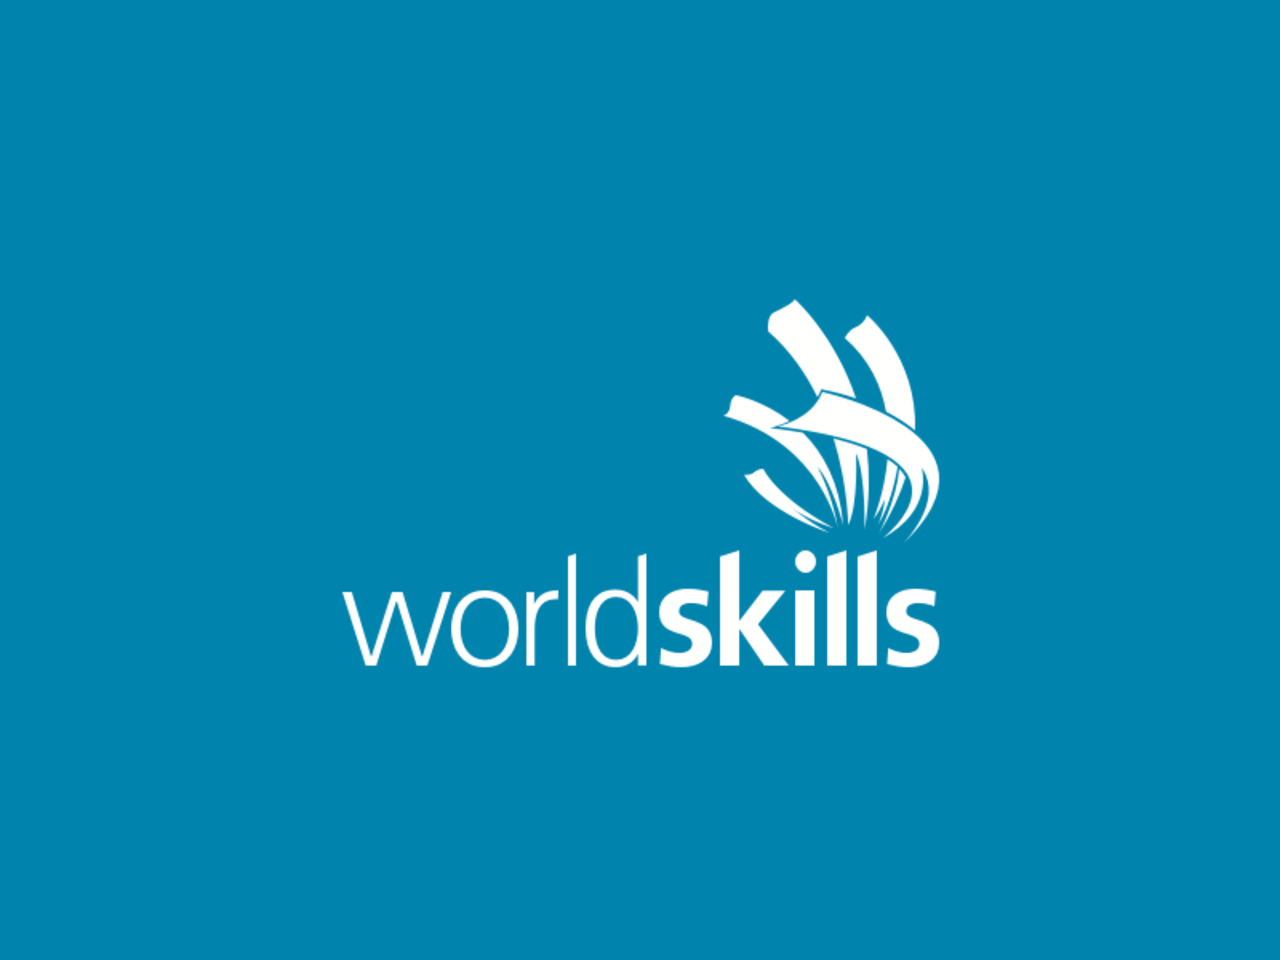 WorldSkills statement and position on the conflict in Ukraine